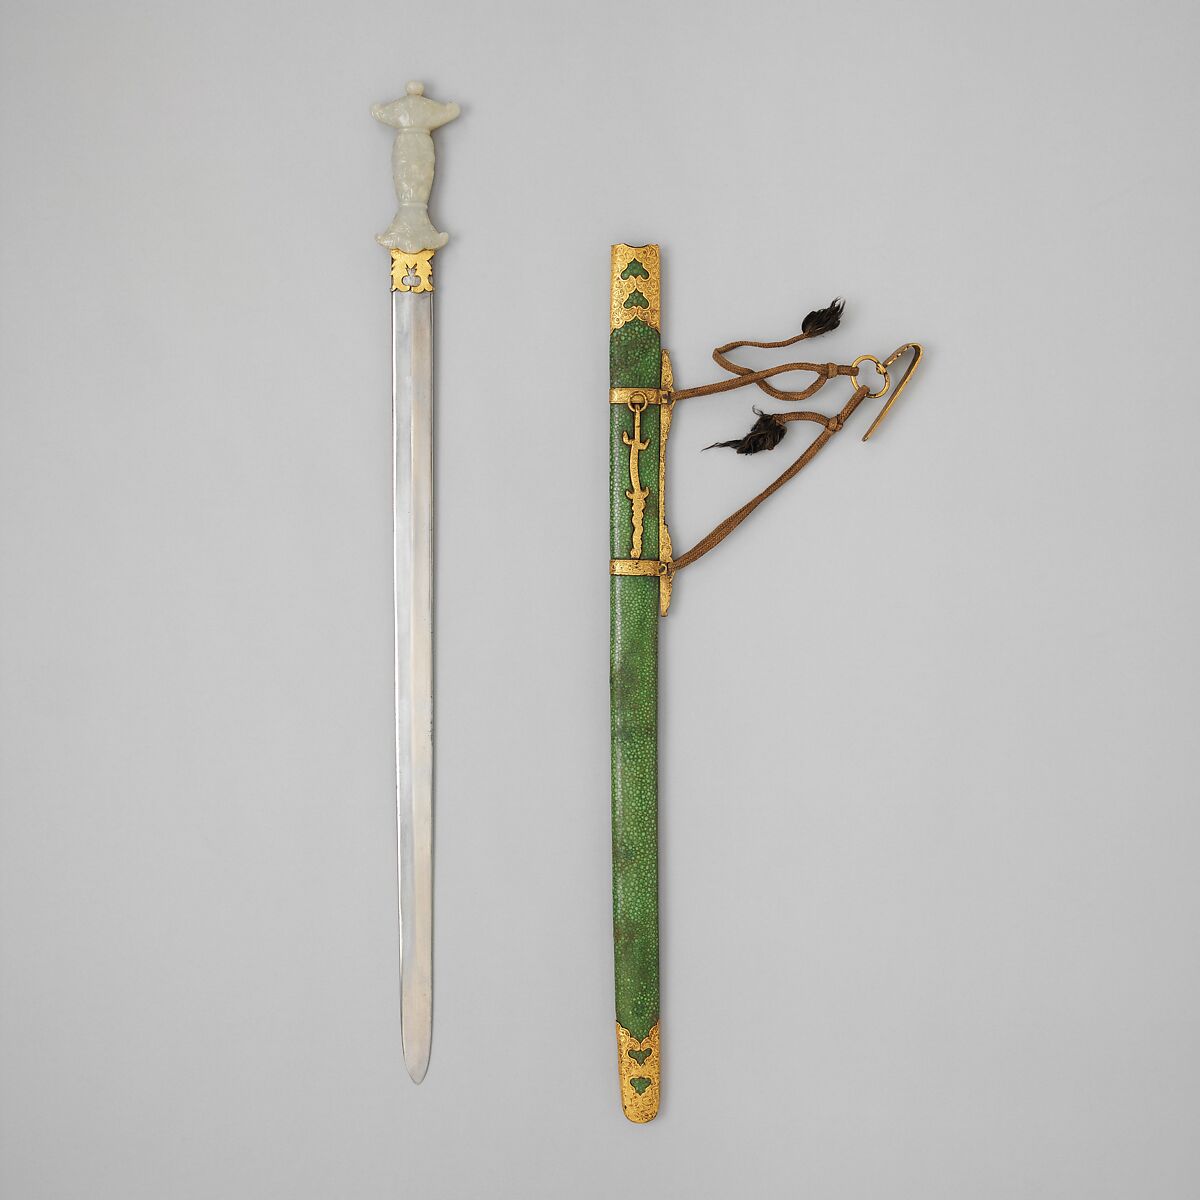 Sword with Scabbard, Steel, jade, bronze, sharkskin, textile, wood, gold, Chinese 